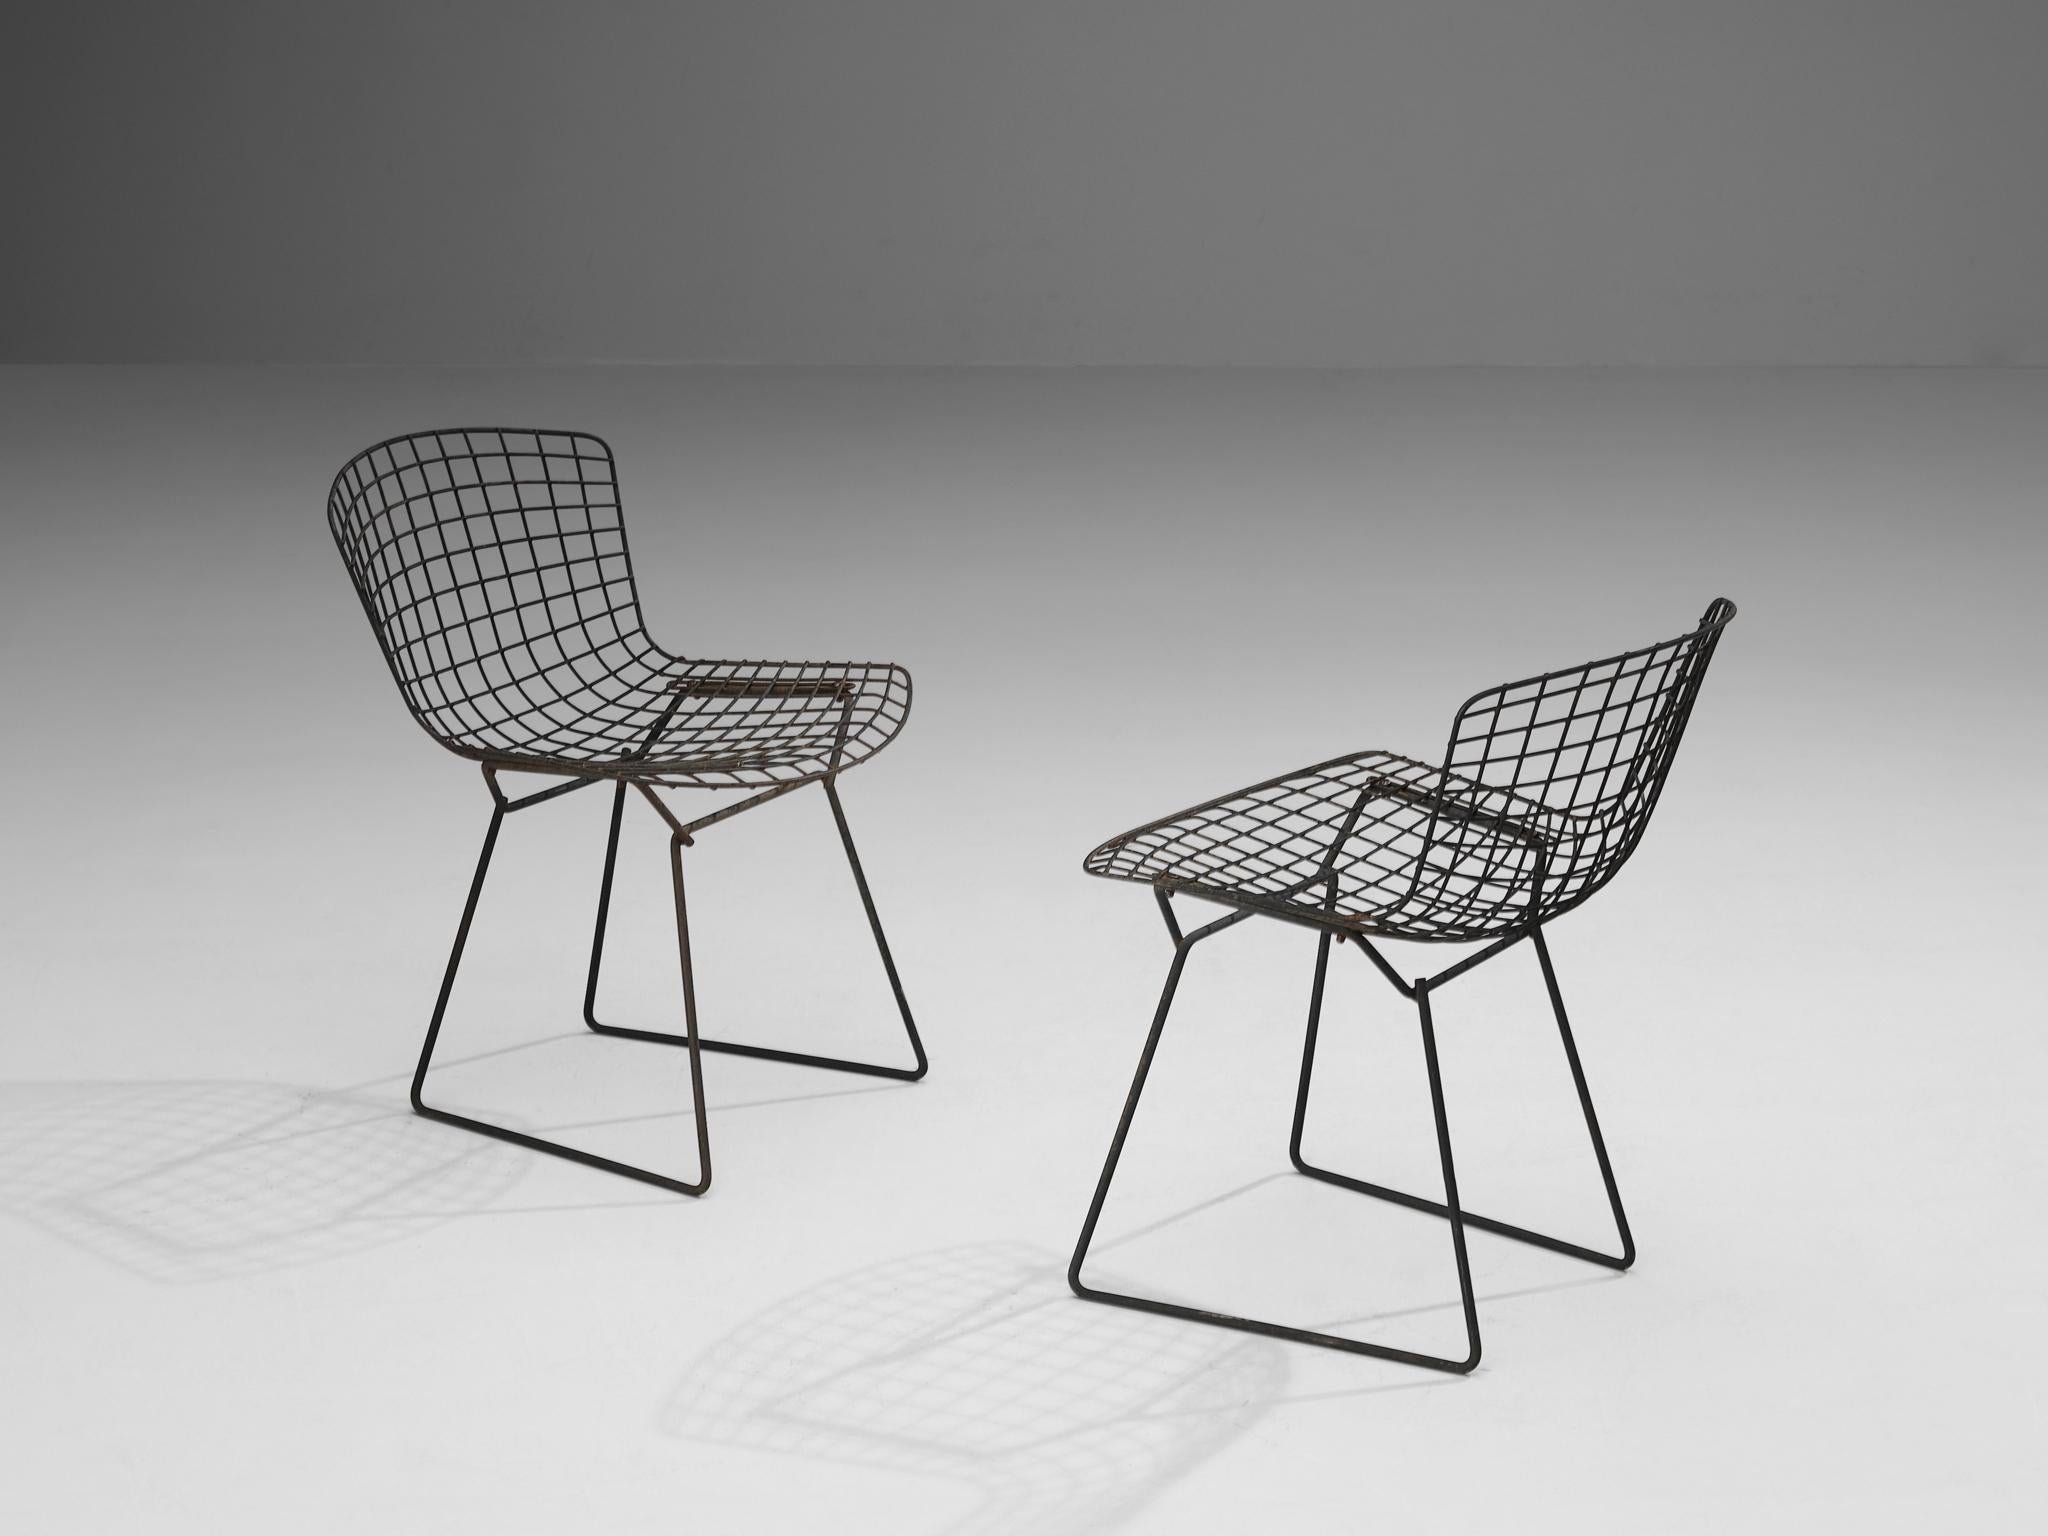 Harry Bertoia for Knoll International, pair of 'side chairs', coated steel, United States, design 1952

These 'side' patio chairs are designed by Harry Bertoia in 1952. Executed in black coated steel, these chairs feature an intricate interlacing of